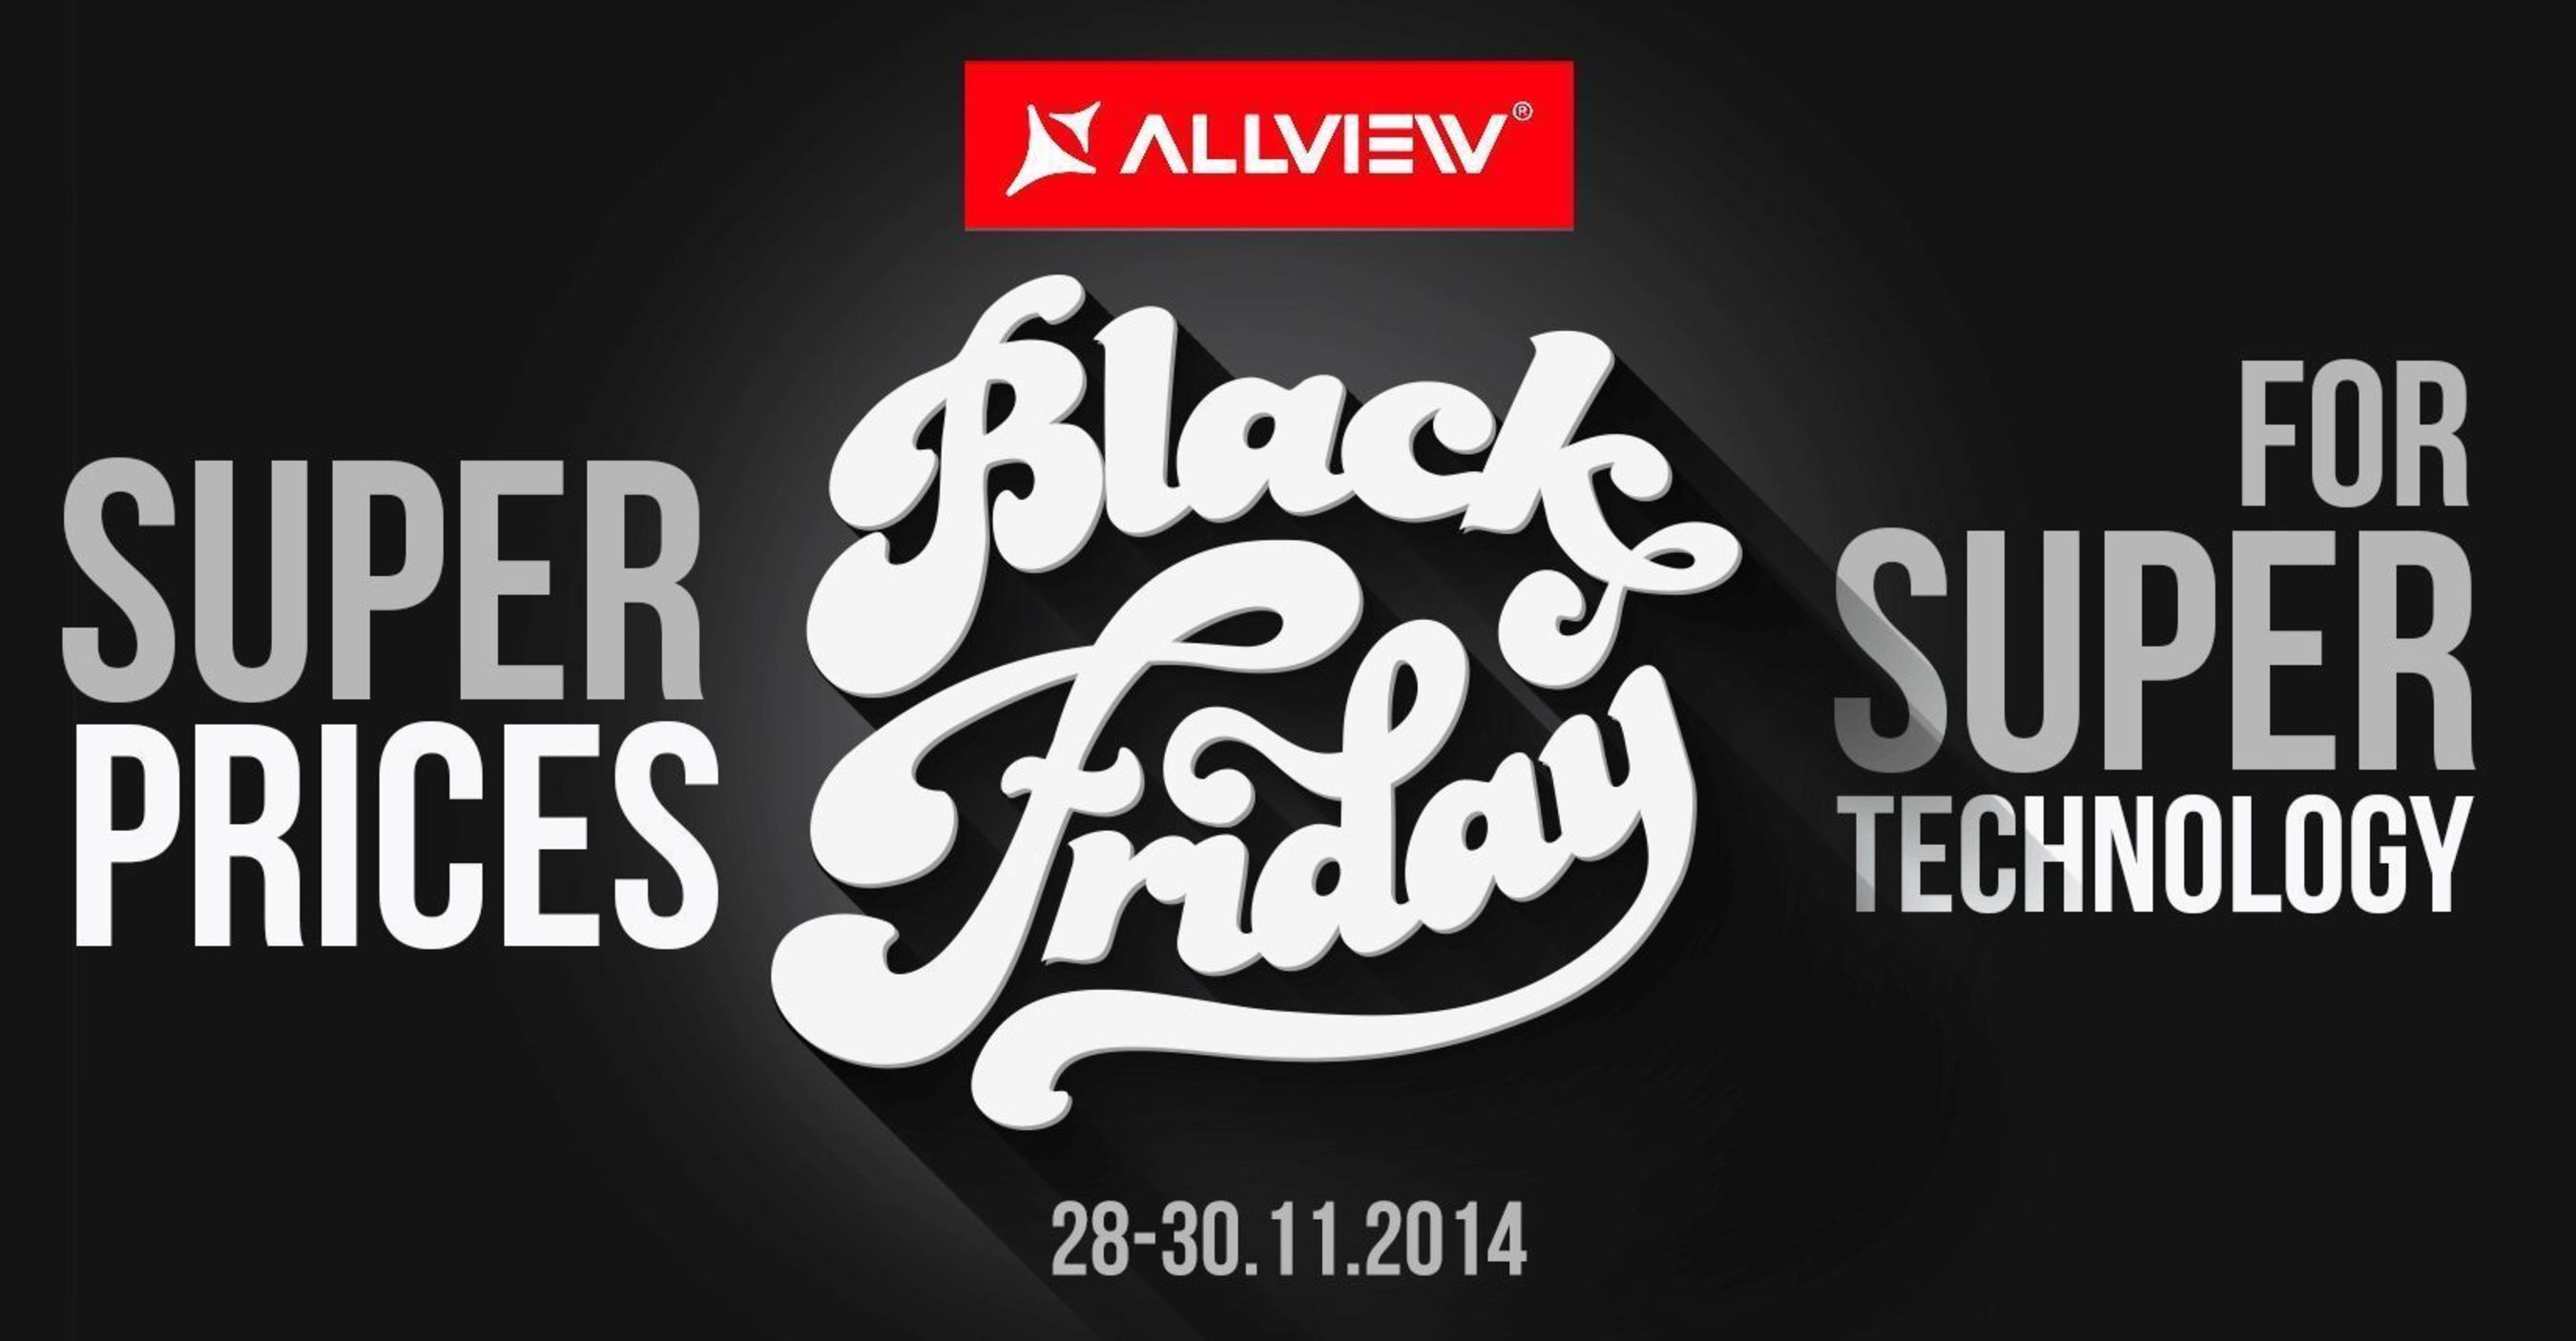 On Black Friday, Allview brings you super technology at super prices (PRNewsFoto/Allview)